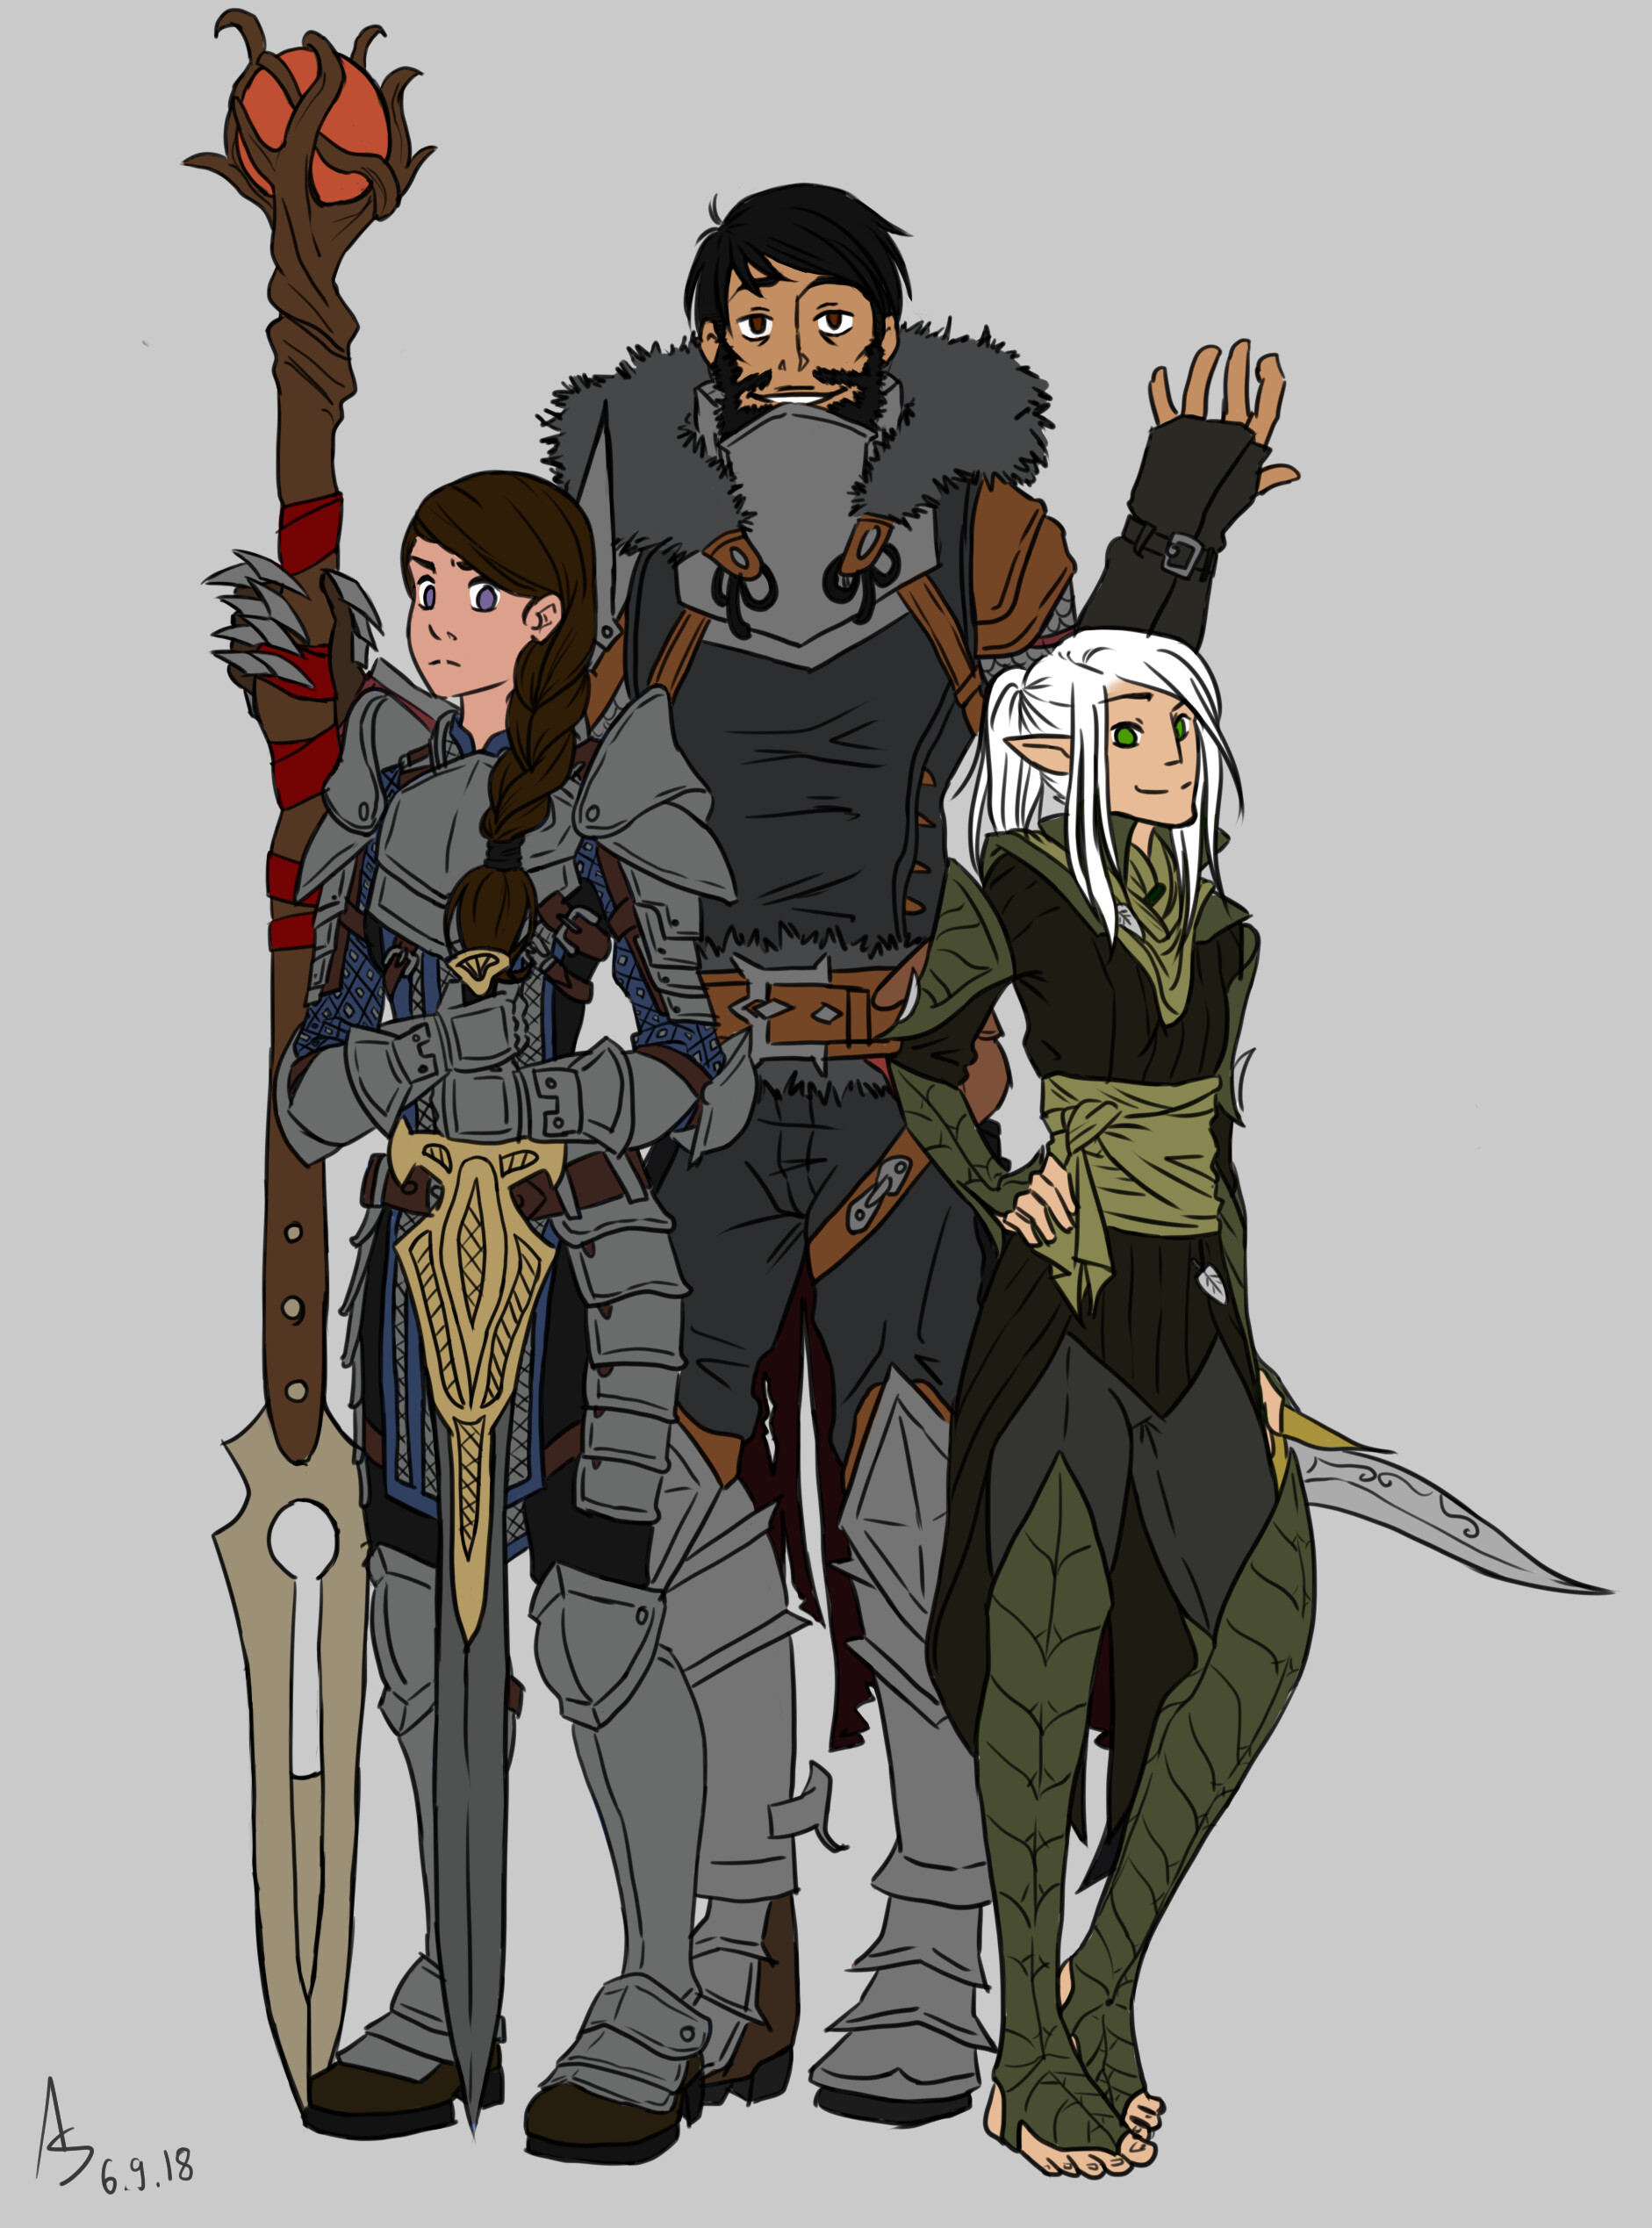 Heros of Thedas. Warden, Hawke, & the Inquisitor. Dragon Age